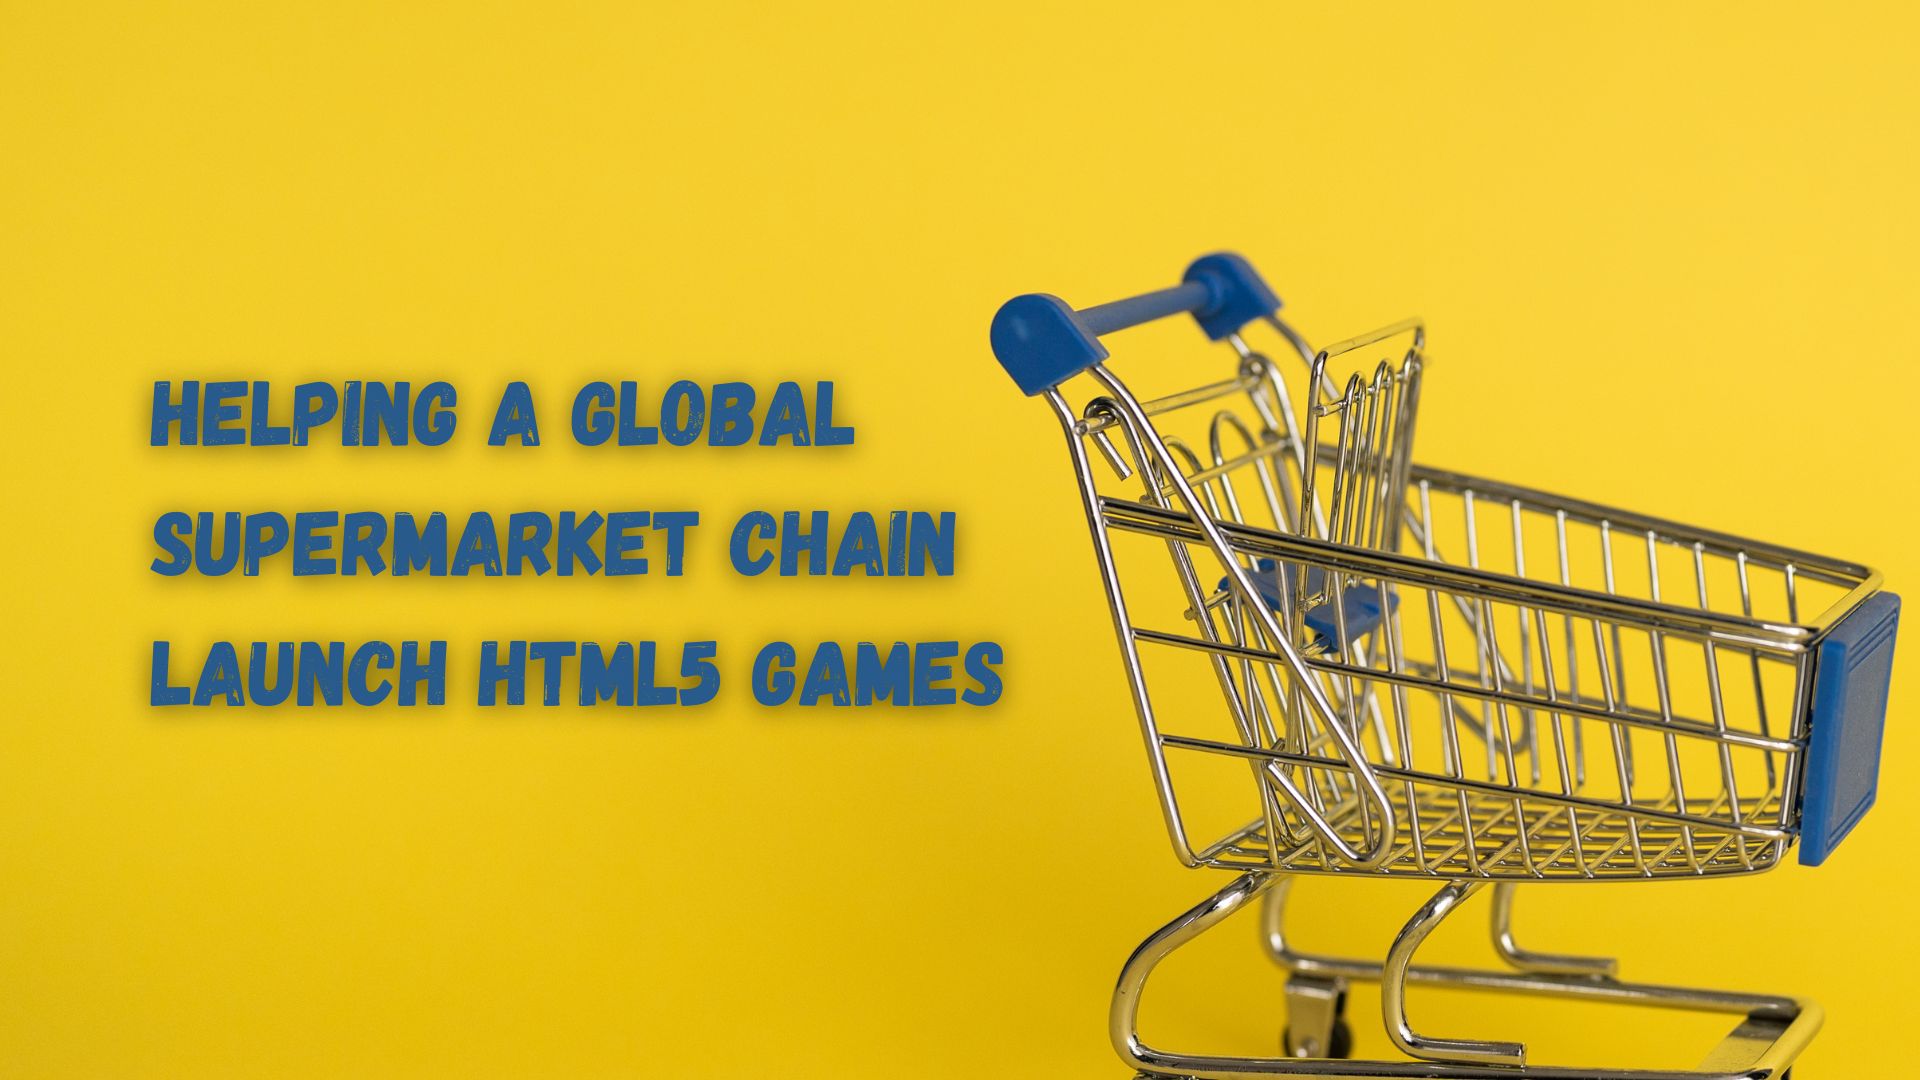 Helping a global supermarket chain launch HTML5 games